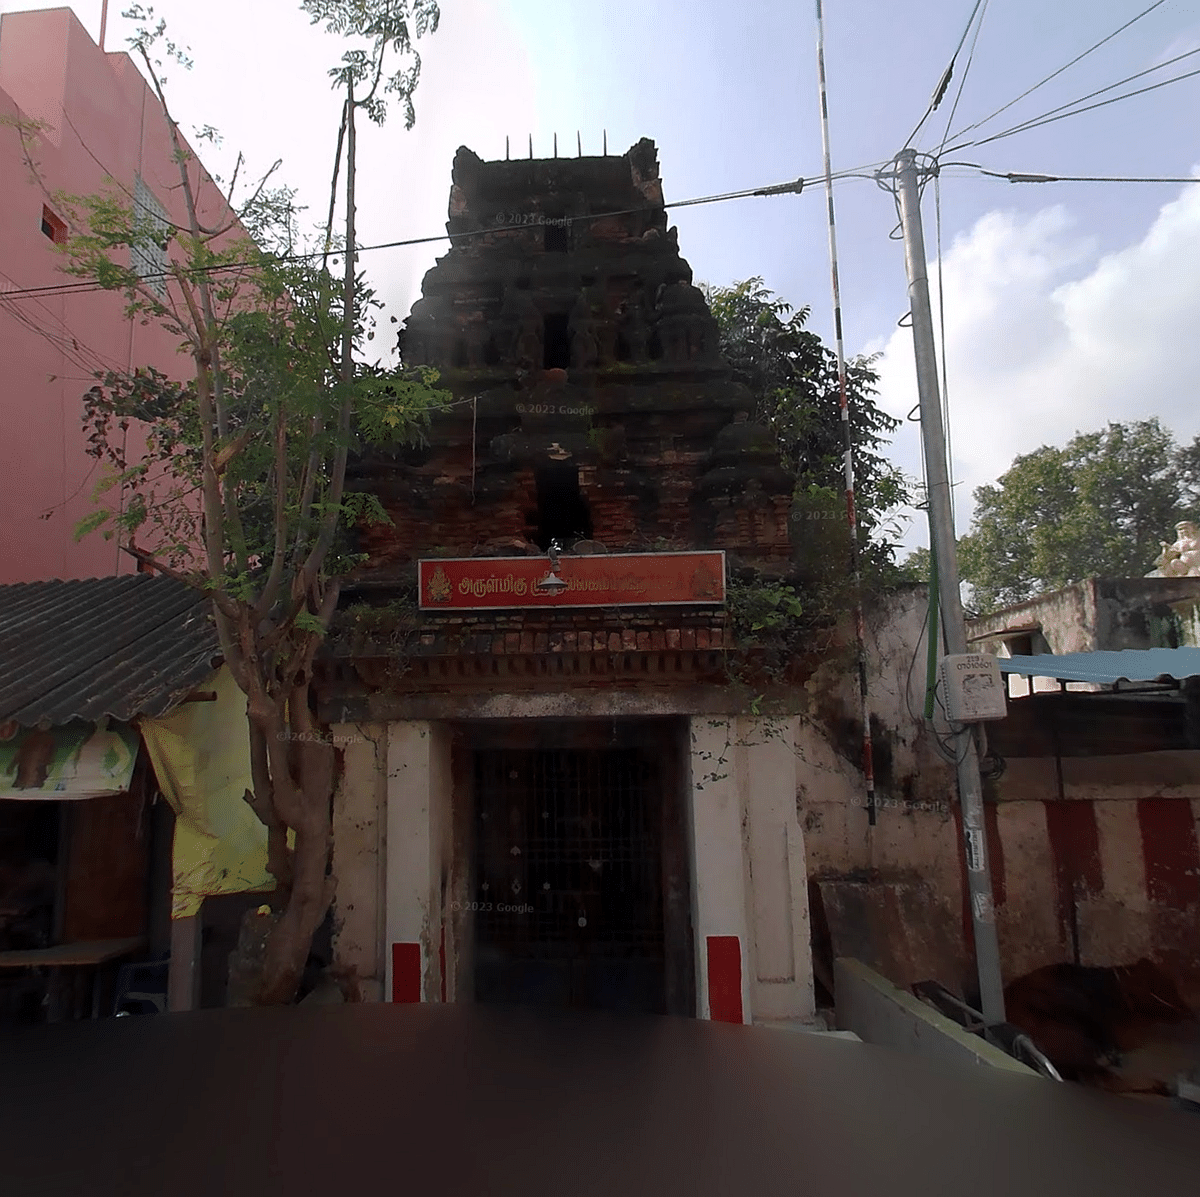 A local shopkeeper and the Tamil Nadu government have clarified that the temple is run by a family, not the state.